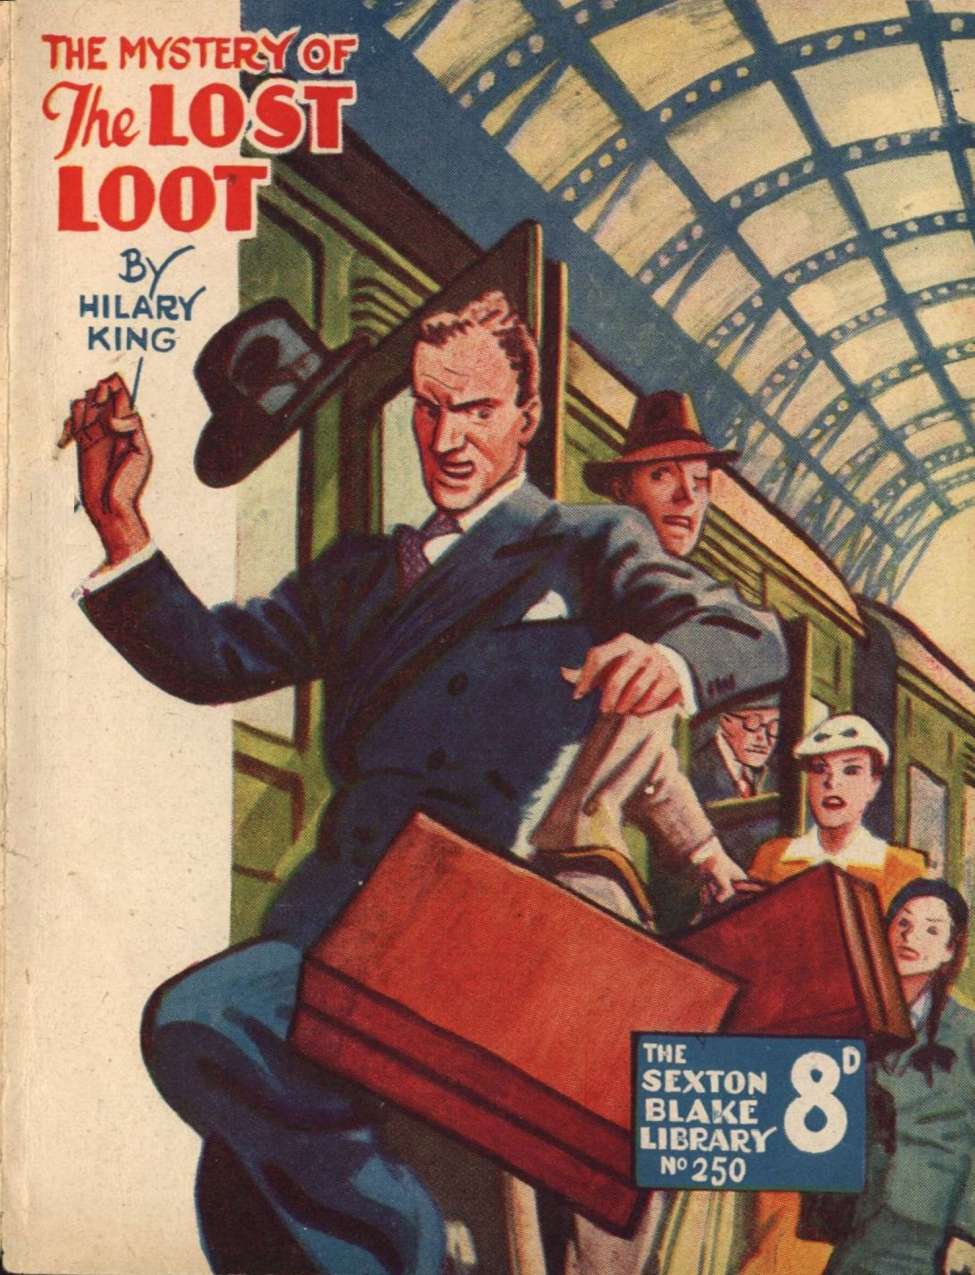 Book Cover For Sexton Blake Library S3 250 - The Mystery of the Lost Loot